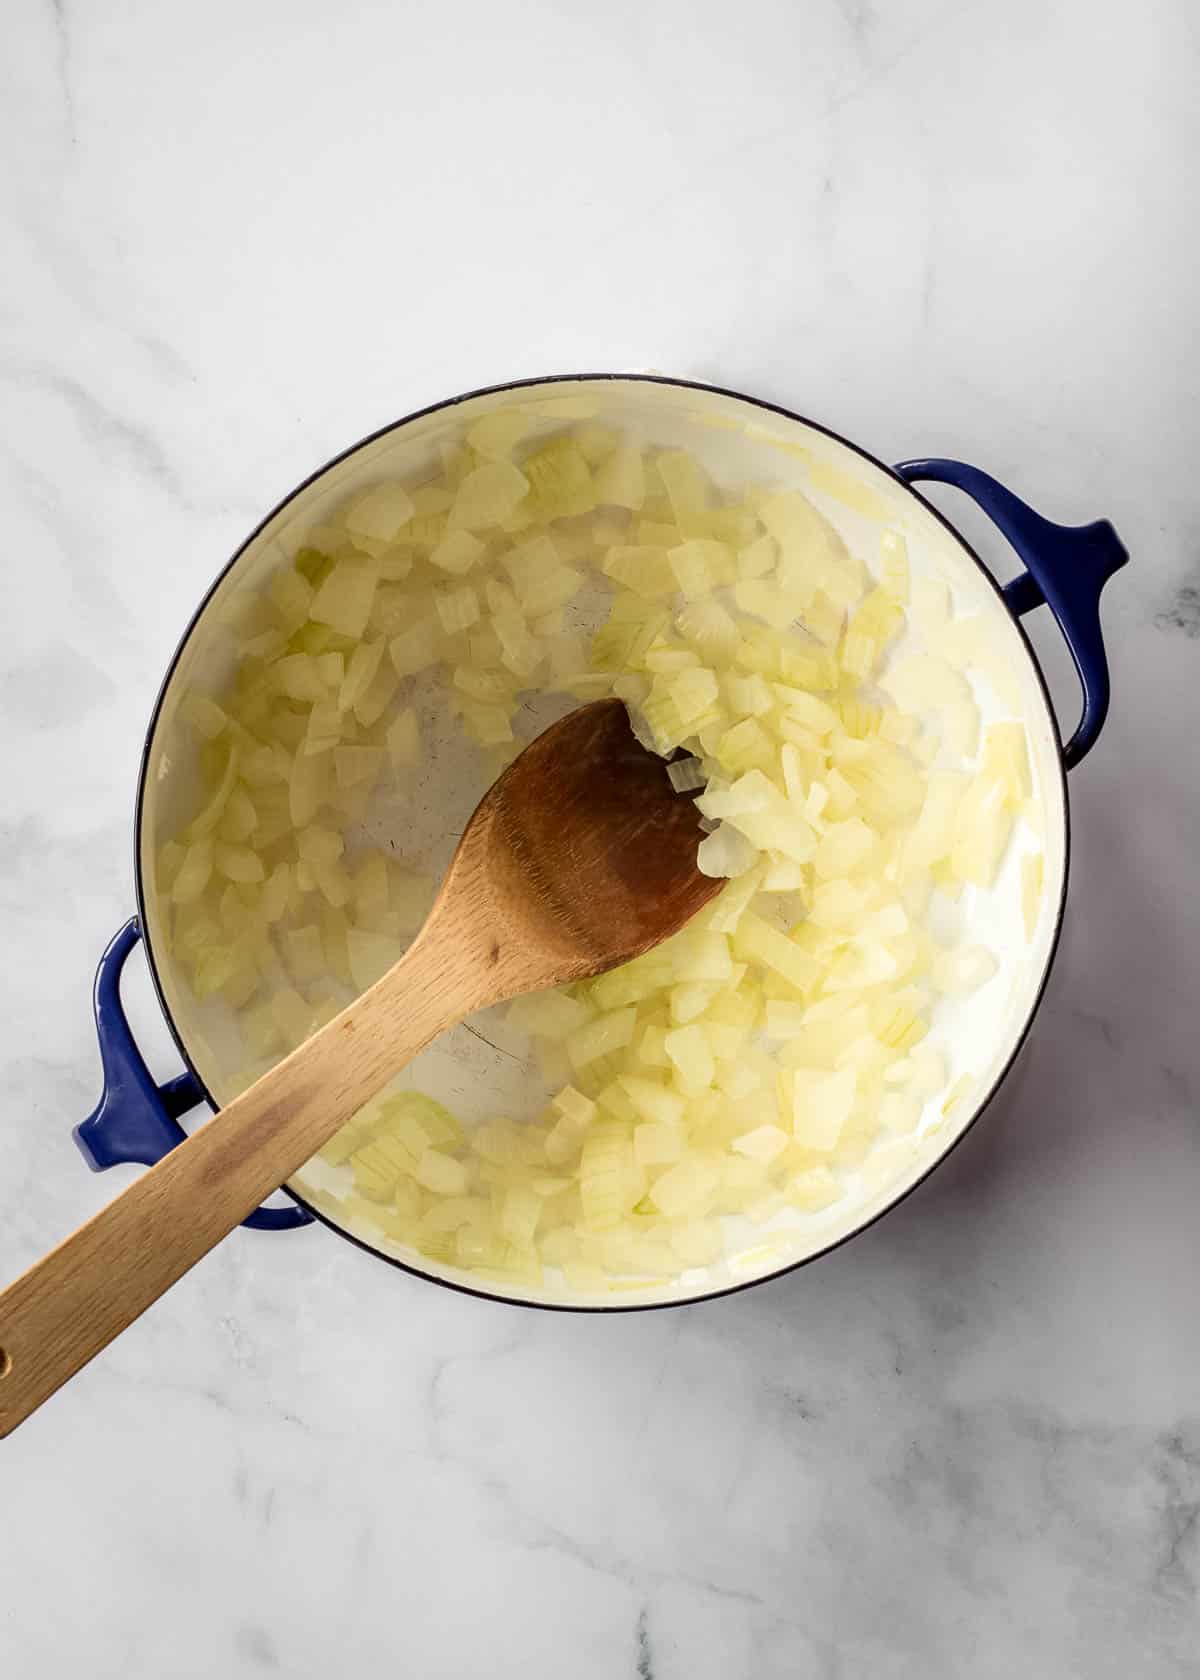 Onion being sautéed in a large dark blue pot with a wooden spoon.